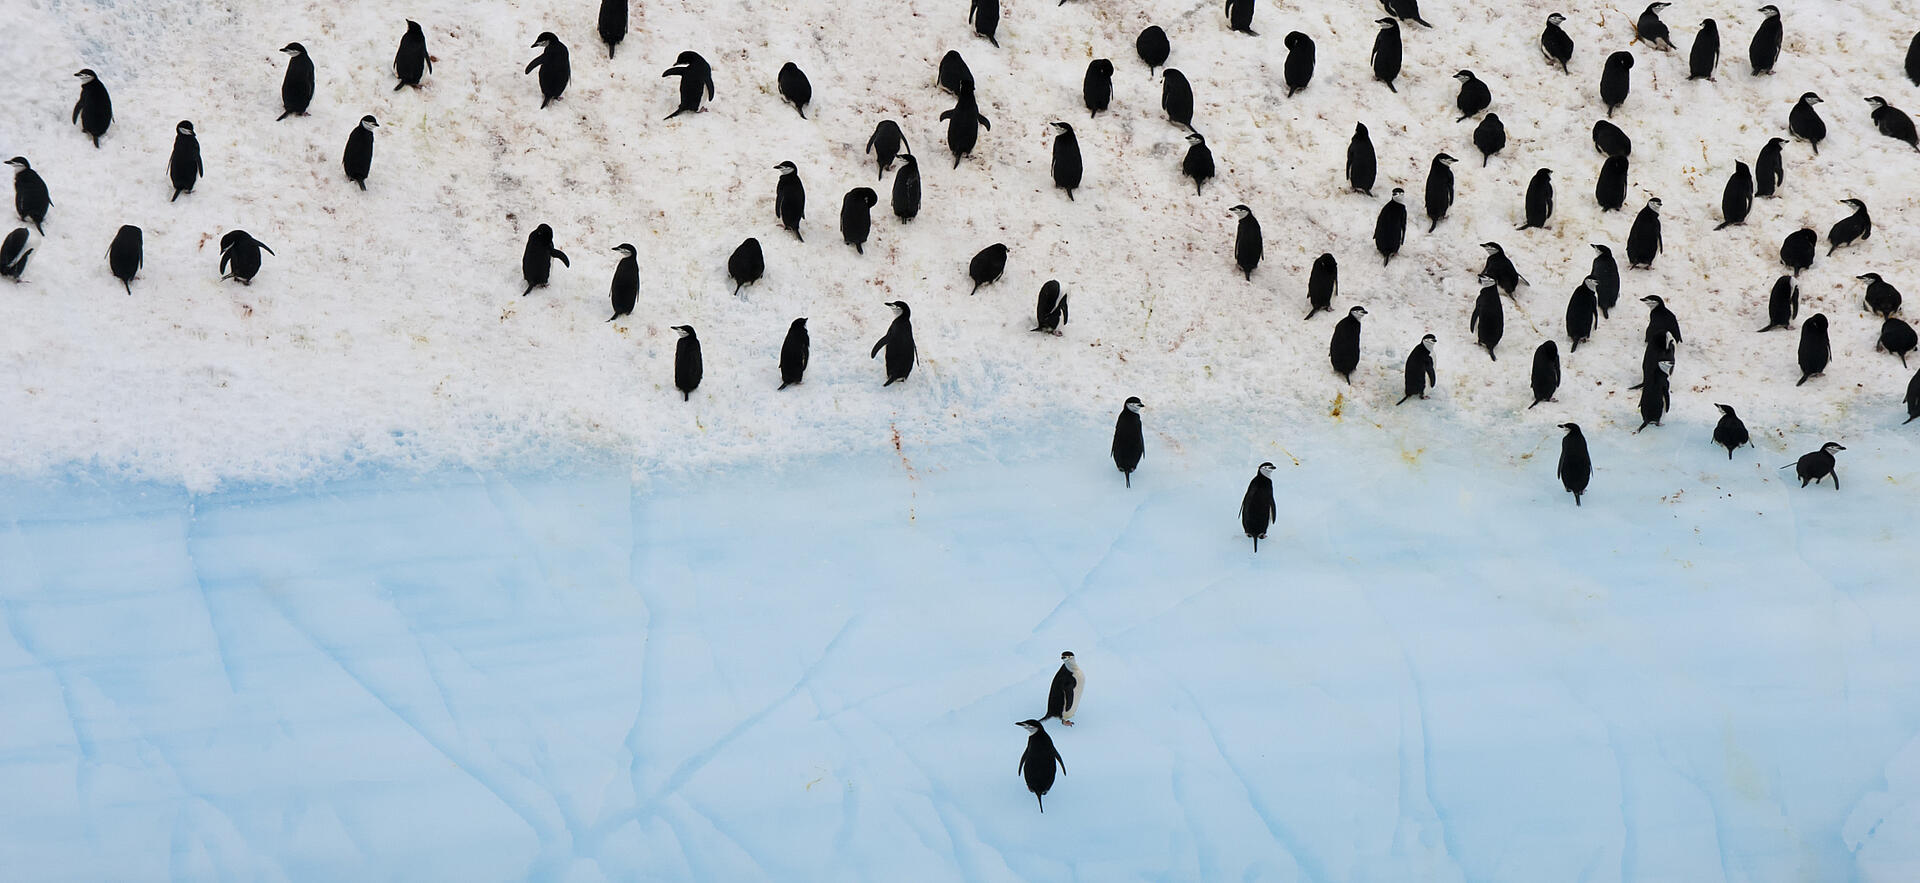 Penguins on an ice floe, seen from above